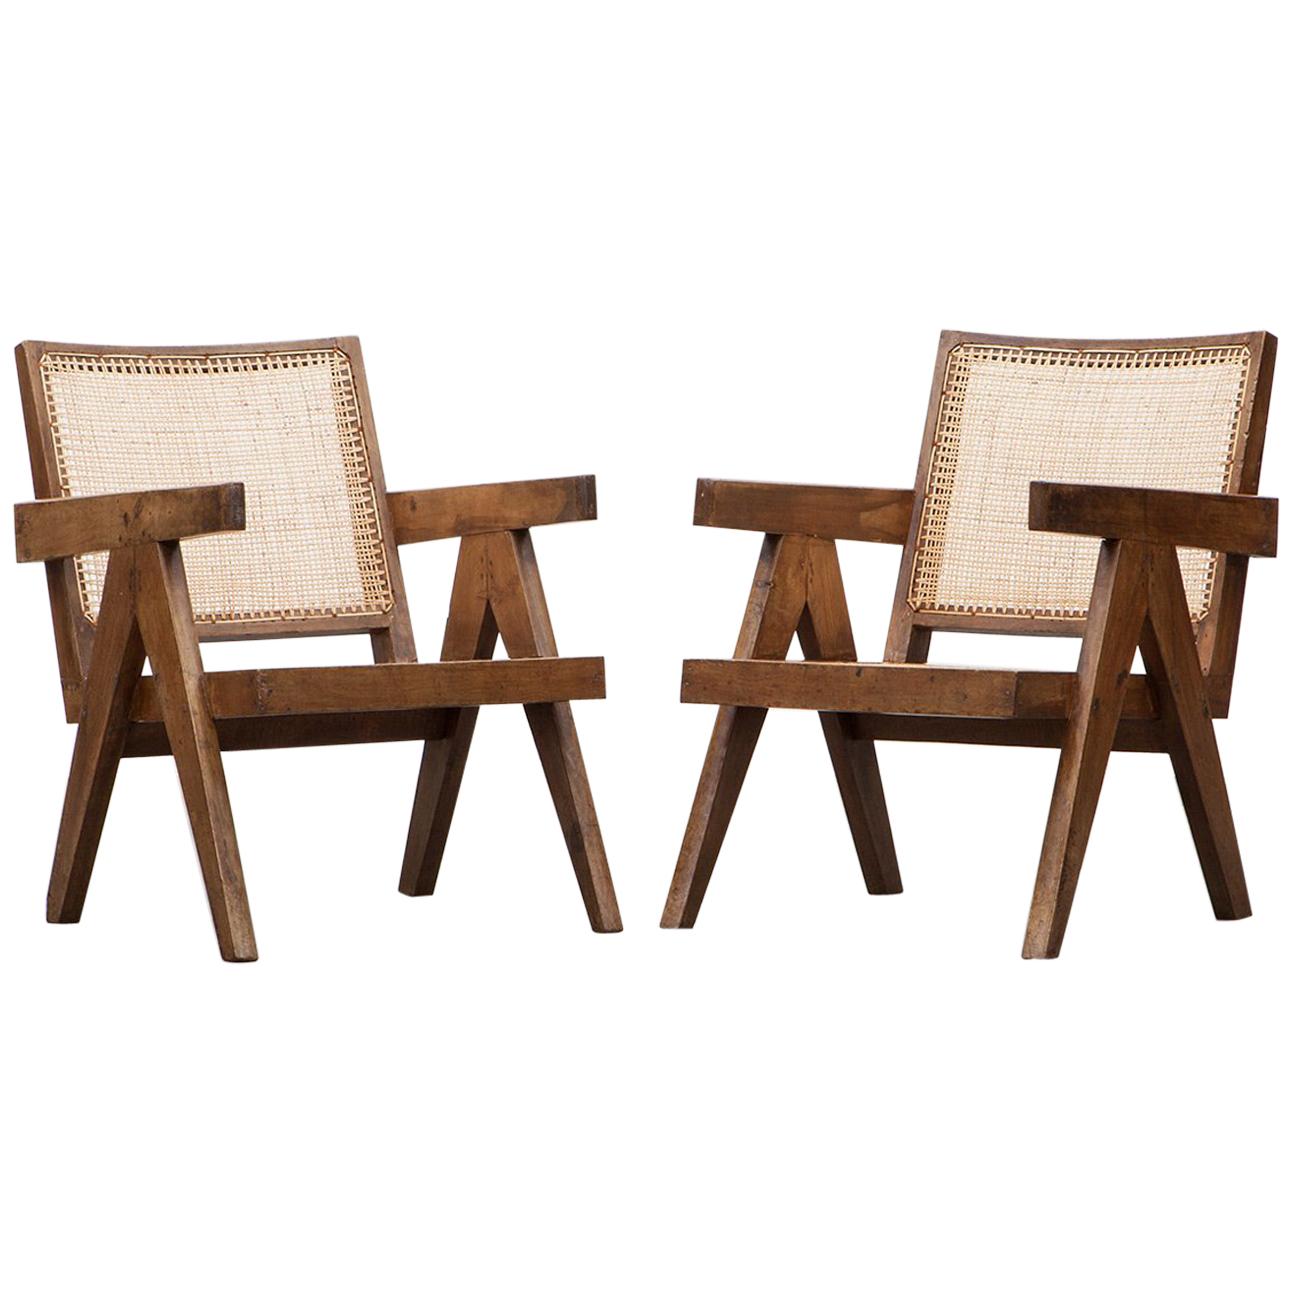 1950s Brown Wooden Teak and Cane Lounge Chairs by Pierre Jeanneret 'c'